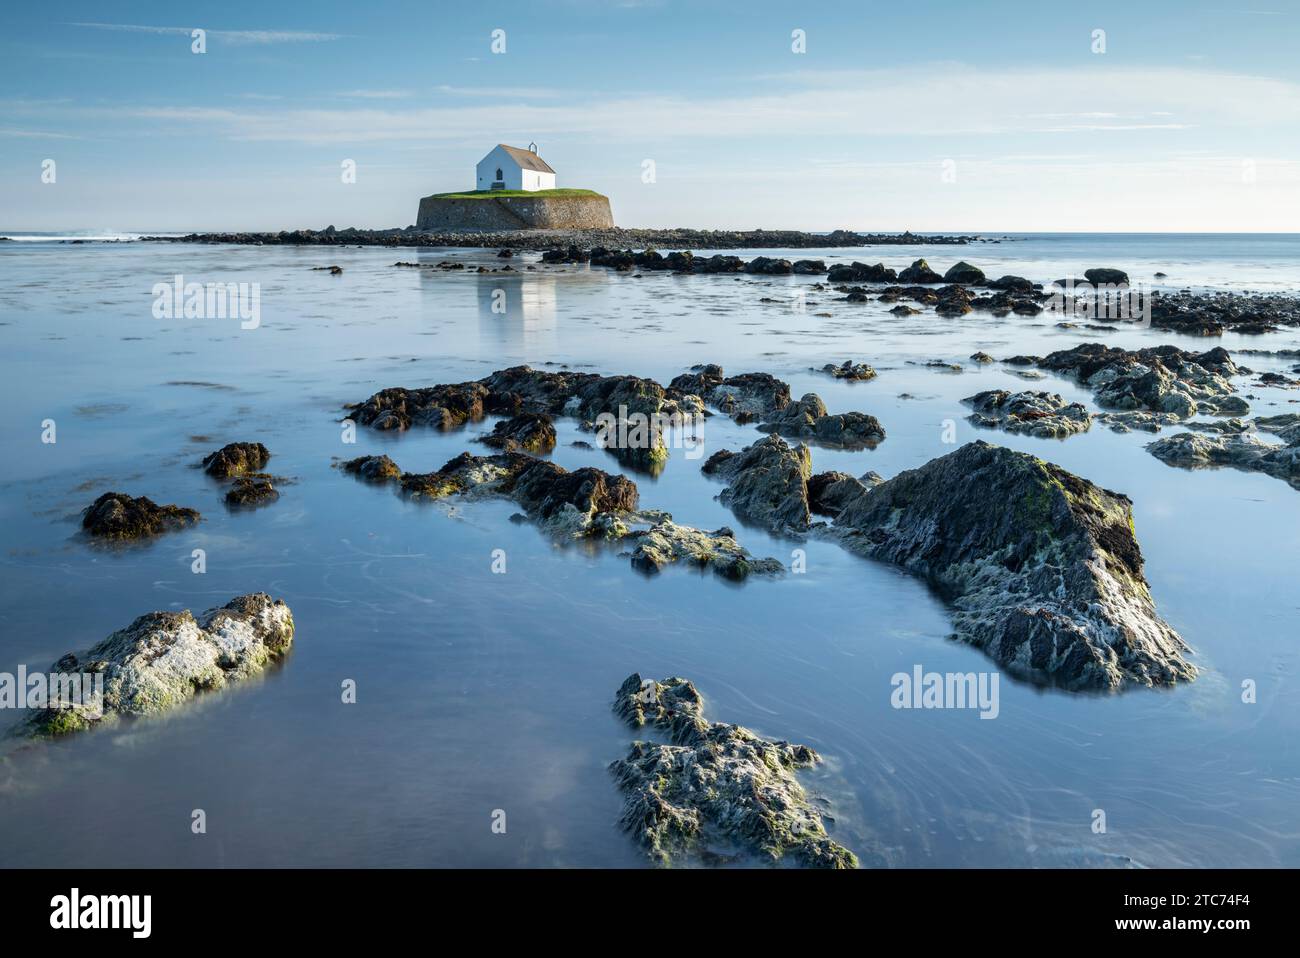 St Cwyfan's Church on a tidal islet in St Cwyfan's Bay, Anglesey, Wales, UK.  Spring (May) 2019. Stock Photo